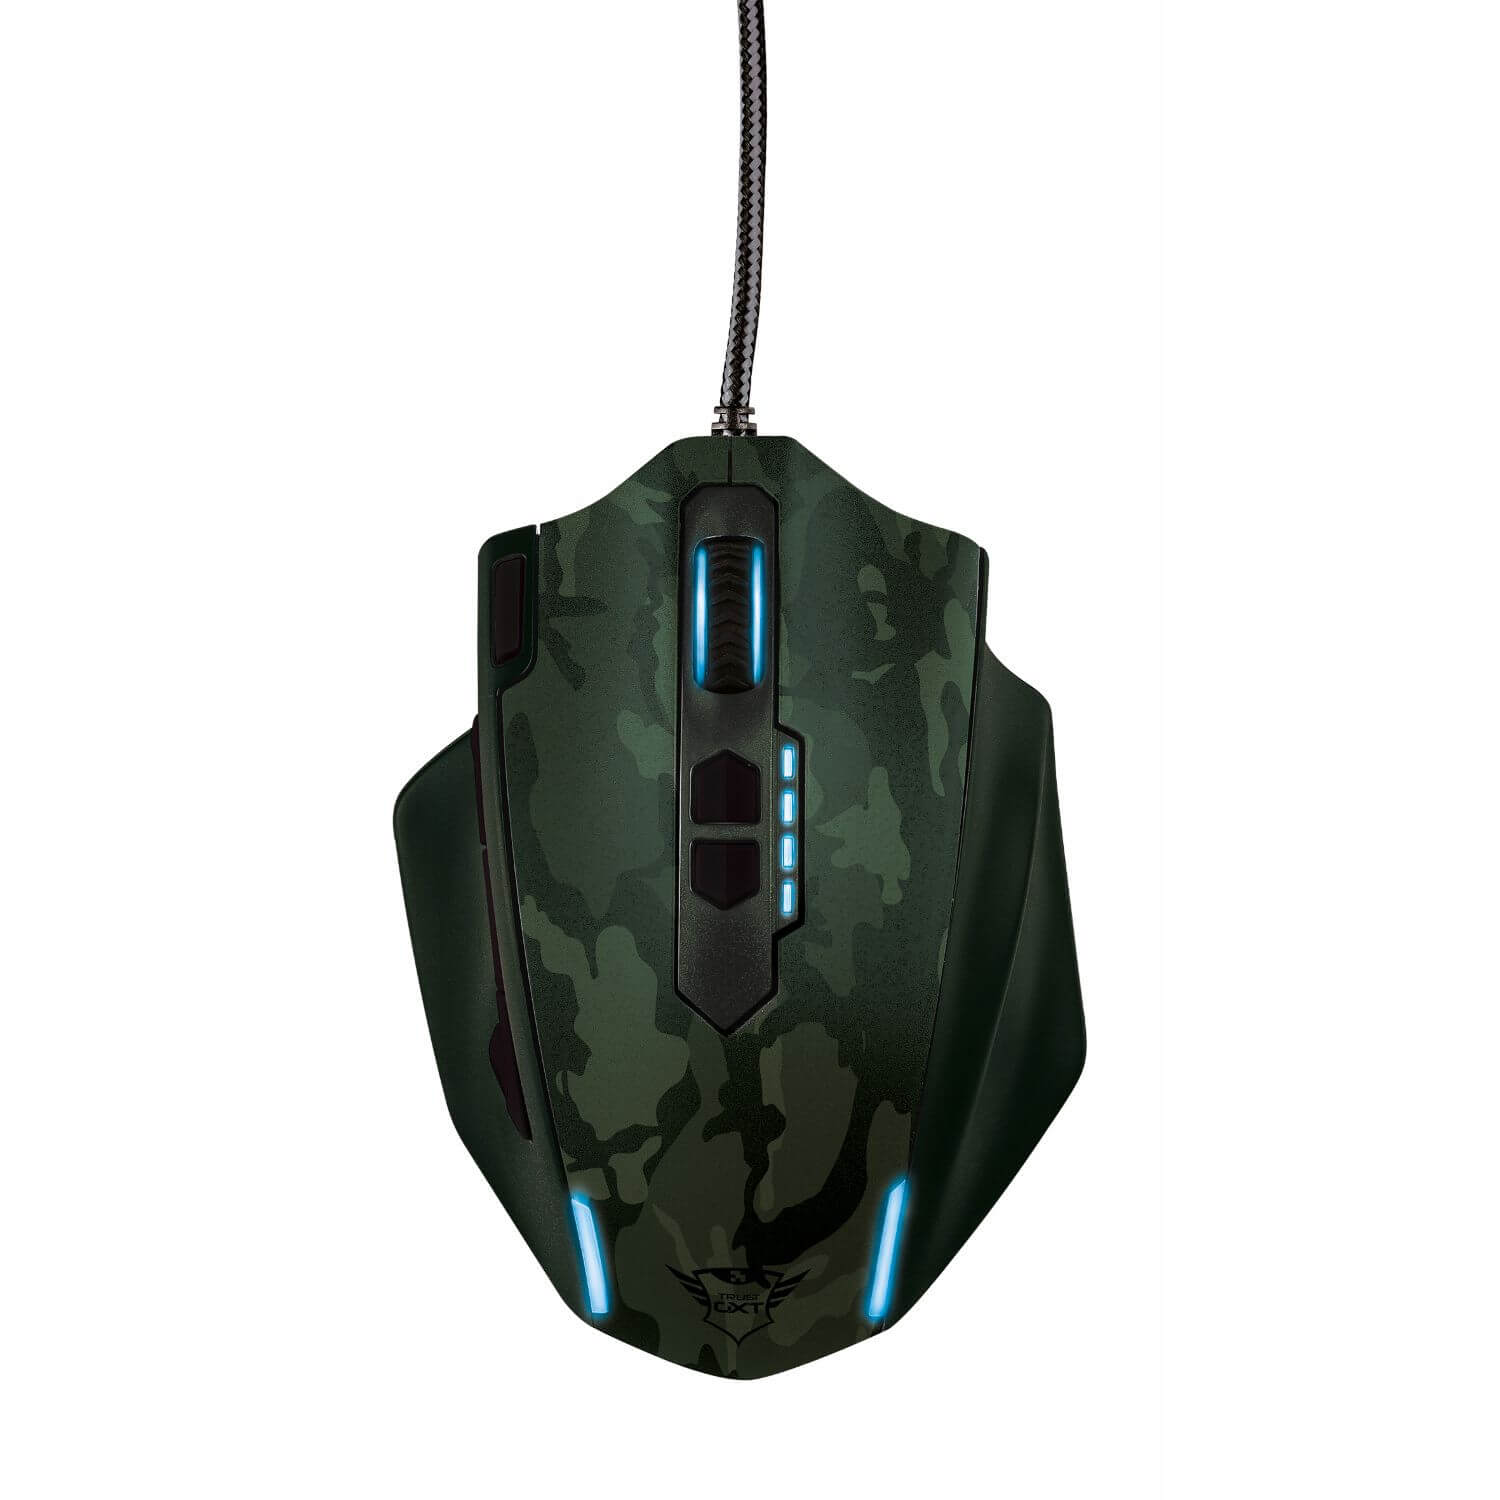  Mouse gaming Trust GXT 155C, Verde 